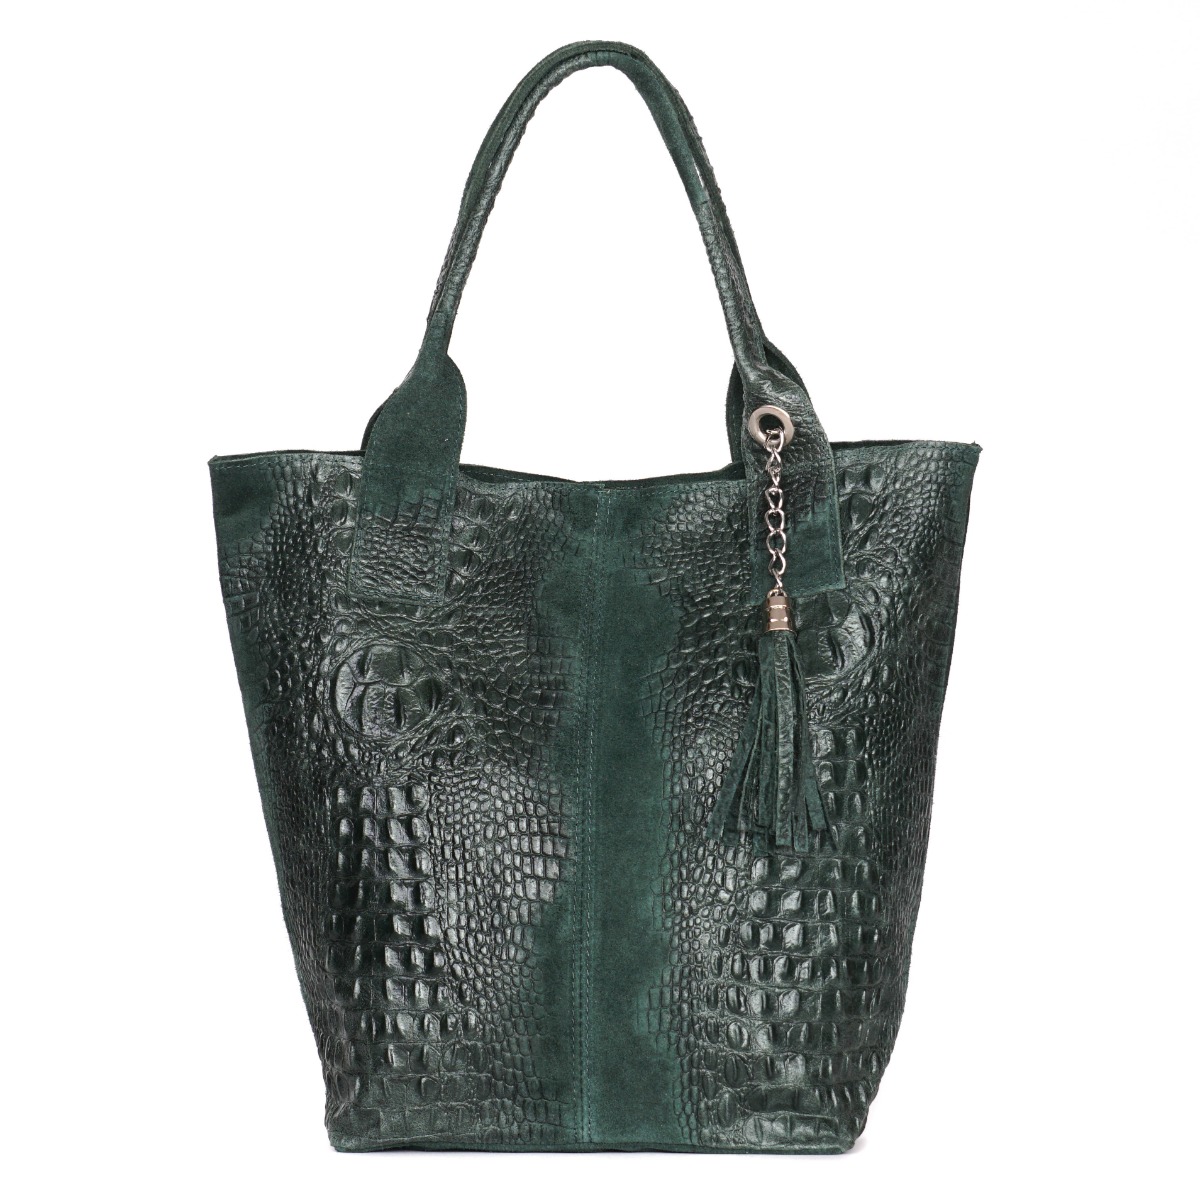 Dark green suede leather women's tote bag